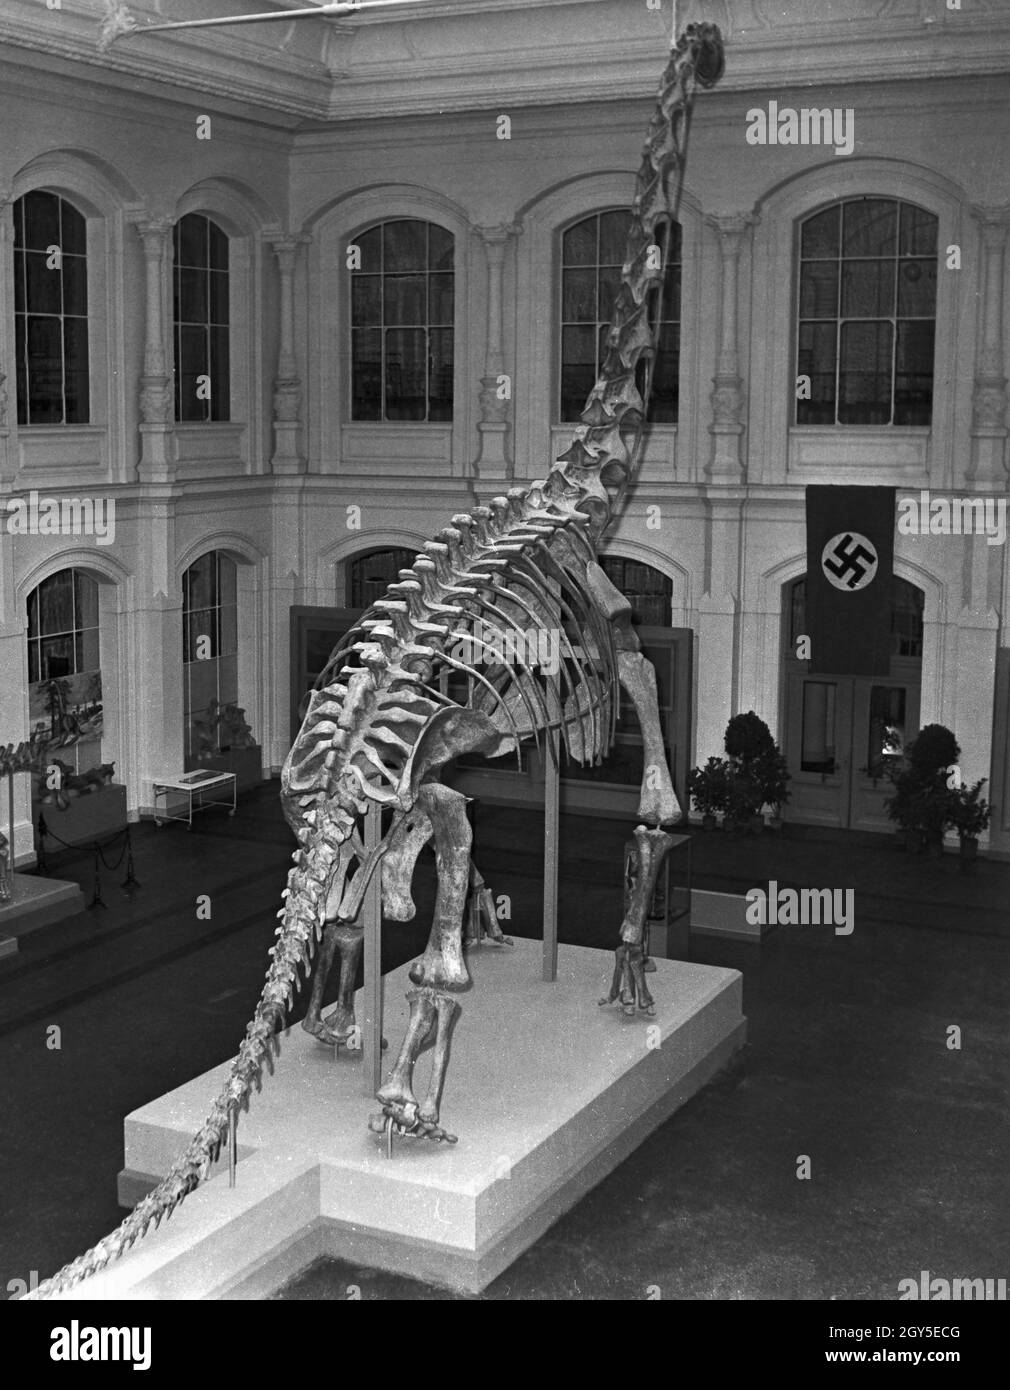 History museum and berlin Black and White Stock Photos & Images - Alamy